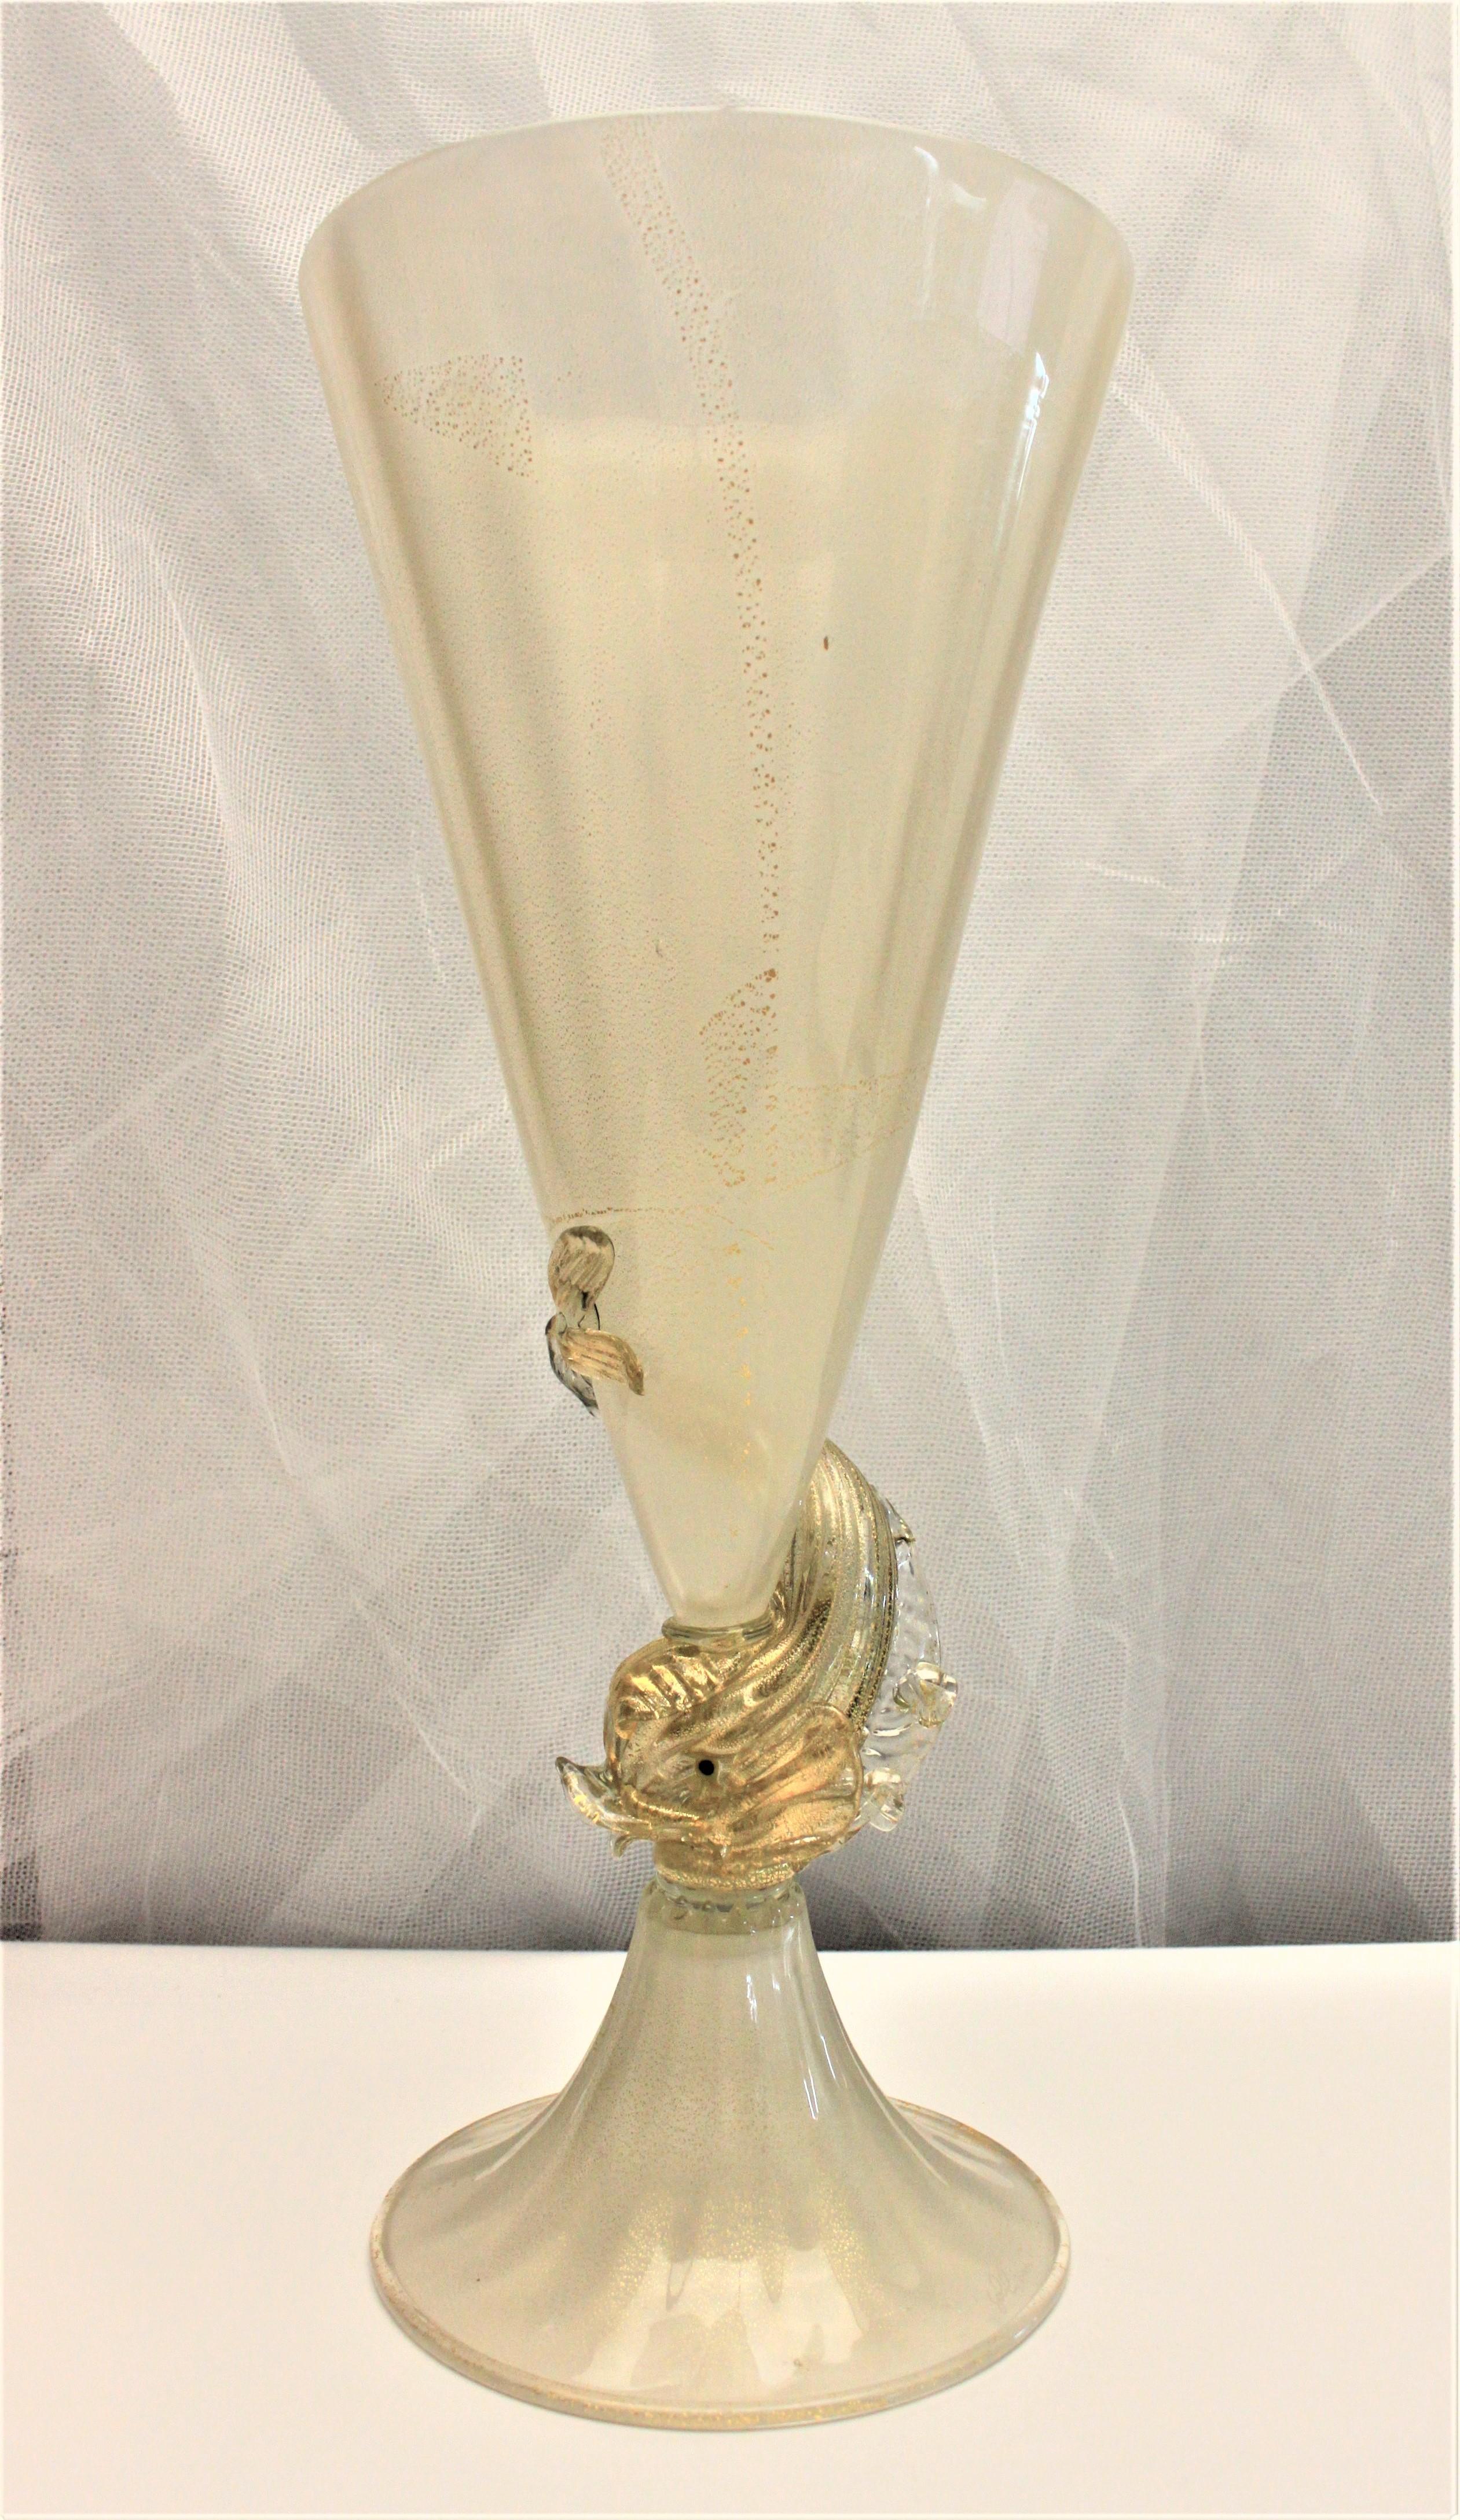 This Mid-Century Modern art glass Murano vase is Artist-signed at the base, but the signature is illegible, so the exact artist cannot be determined. The trumpet style vase is done in a somewhat opaque base glass with heavy flecks of gold, or